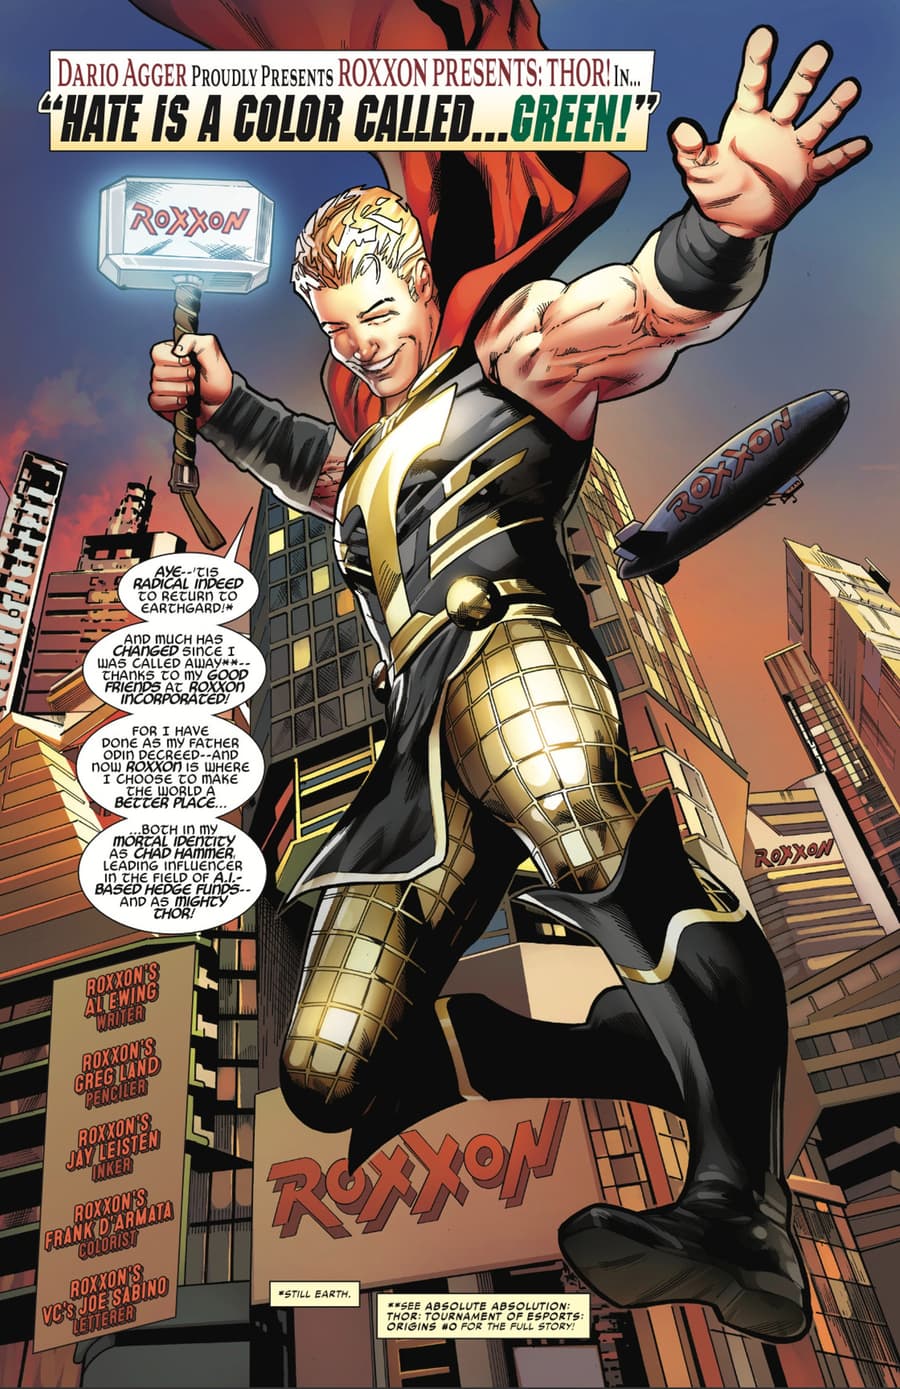 ROXXON PRESENTS: THOR (2024) #1 page by Al Ewing, Greg Land, and Jay Leisten